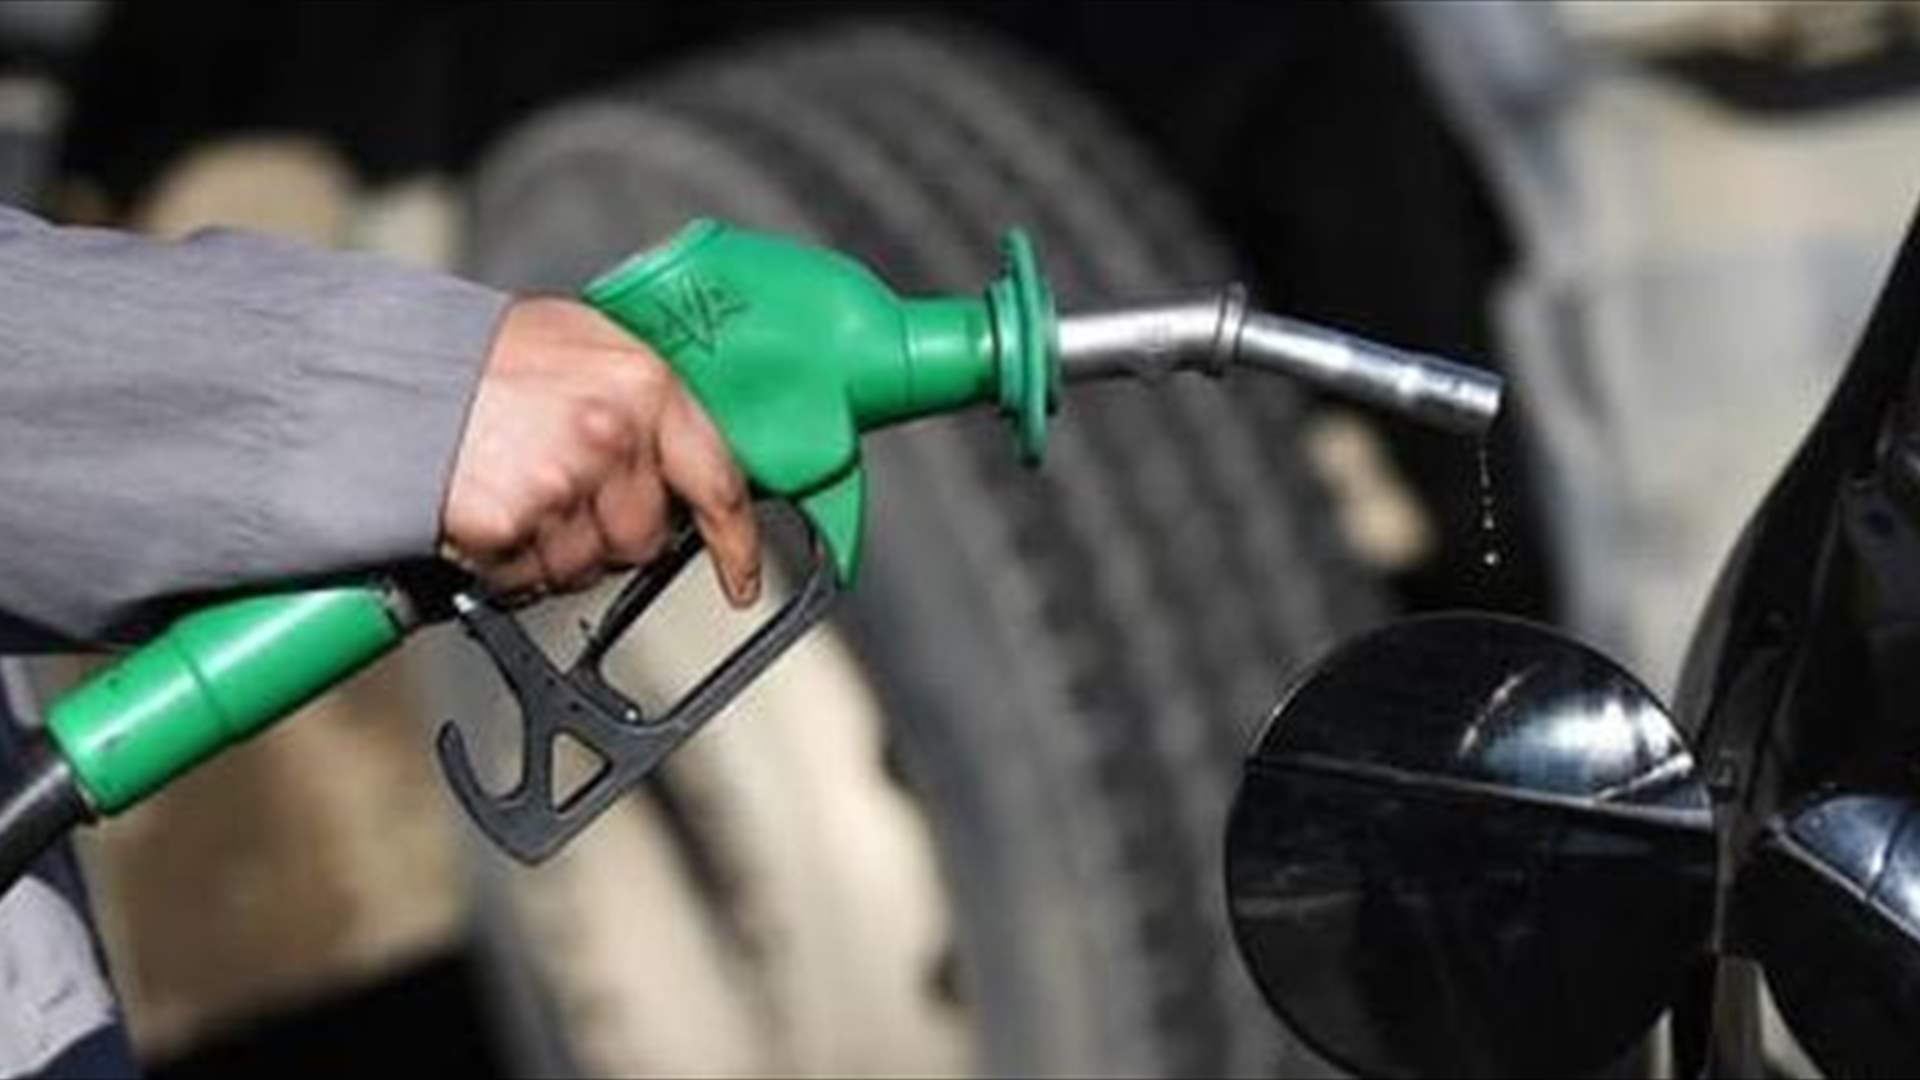 Price of gasoline increases by 9000 LBP